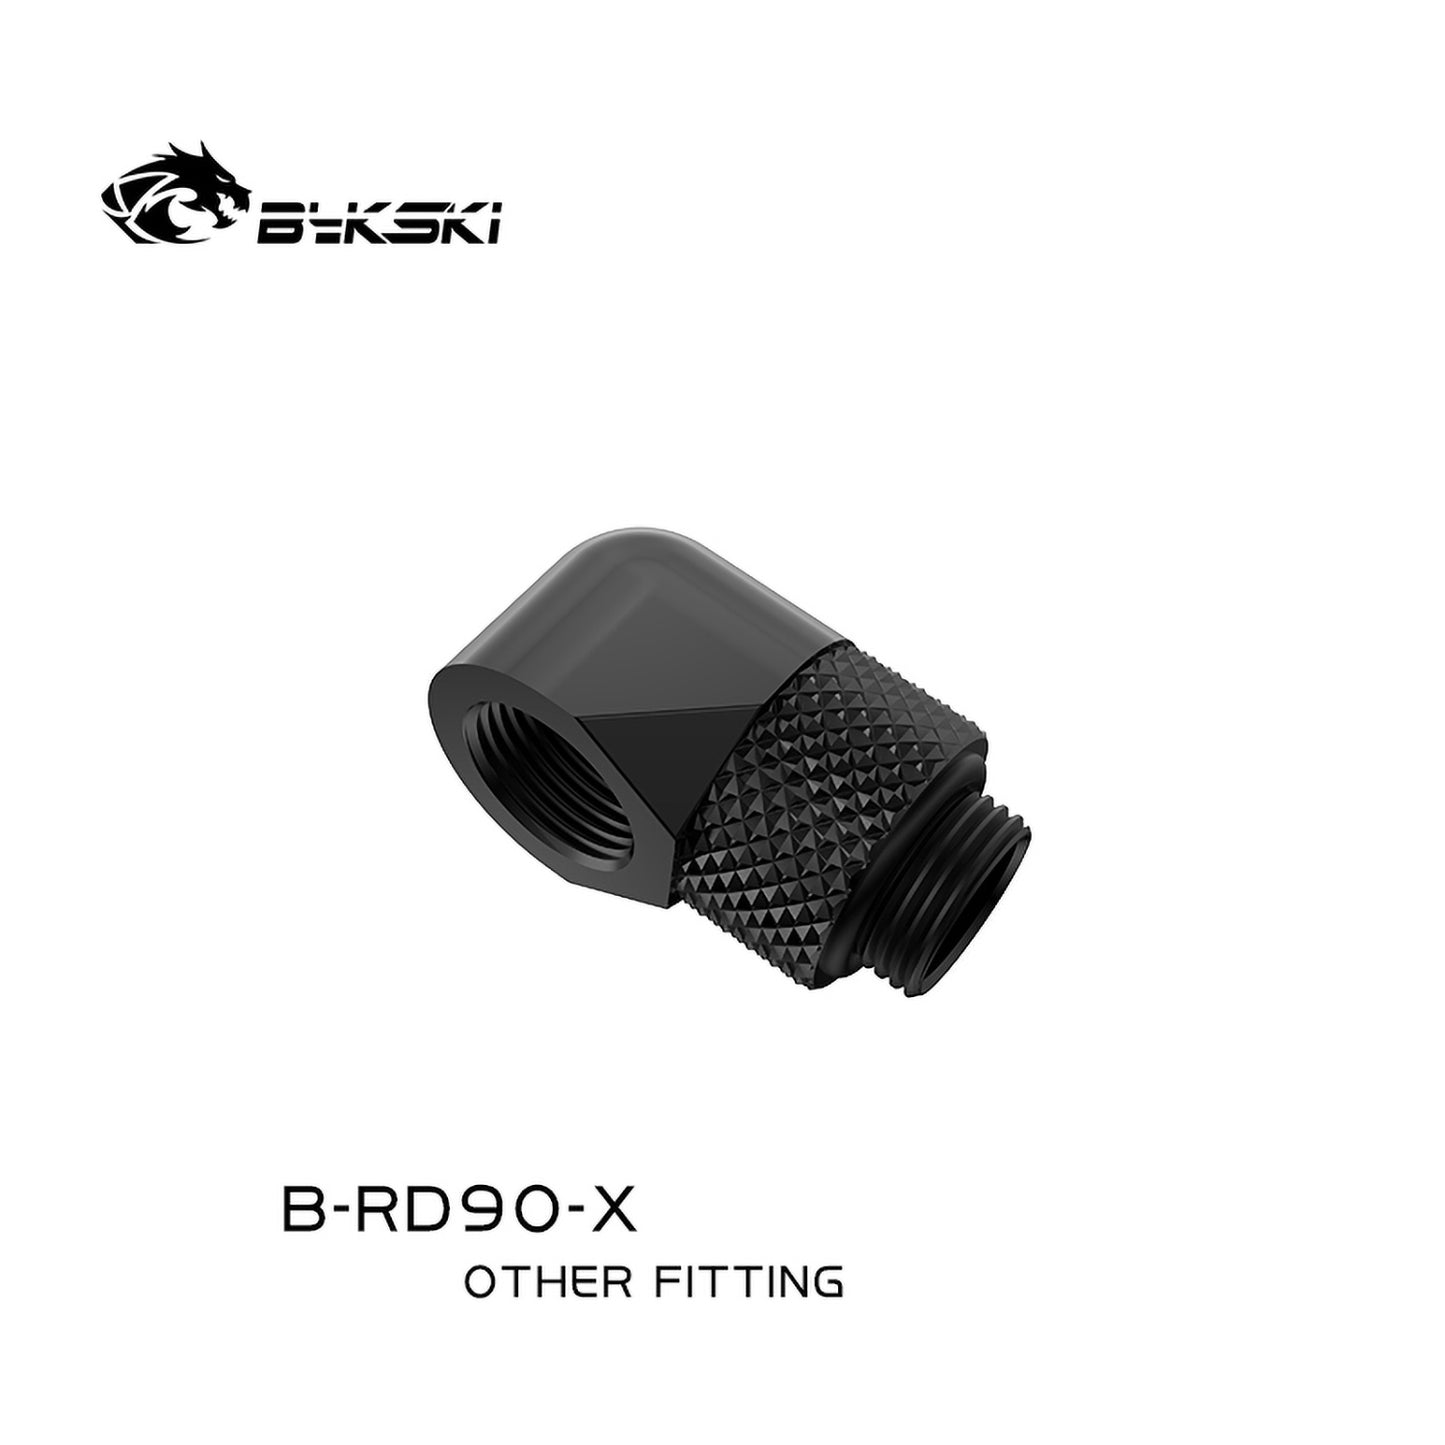 Bykski 90° Rotary Fitting, 90 Degree Adapter With One-side Rotatable Connector, G1/4" Elbow Water Cooling Fitting, B-RD90-X